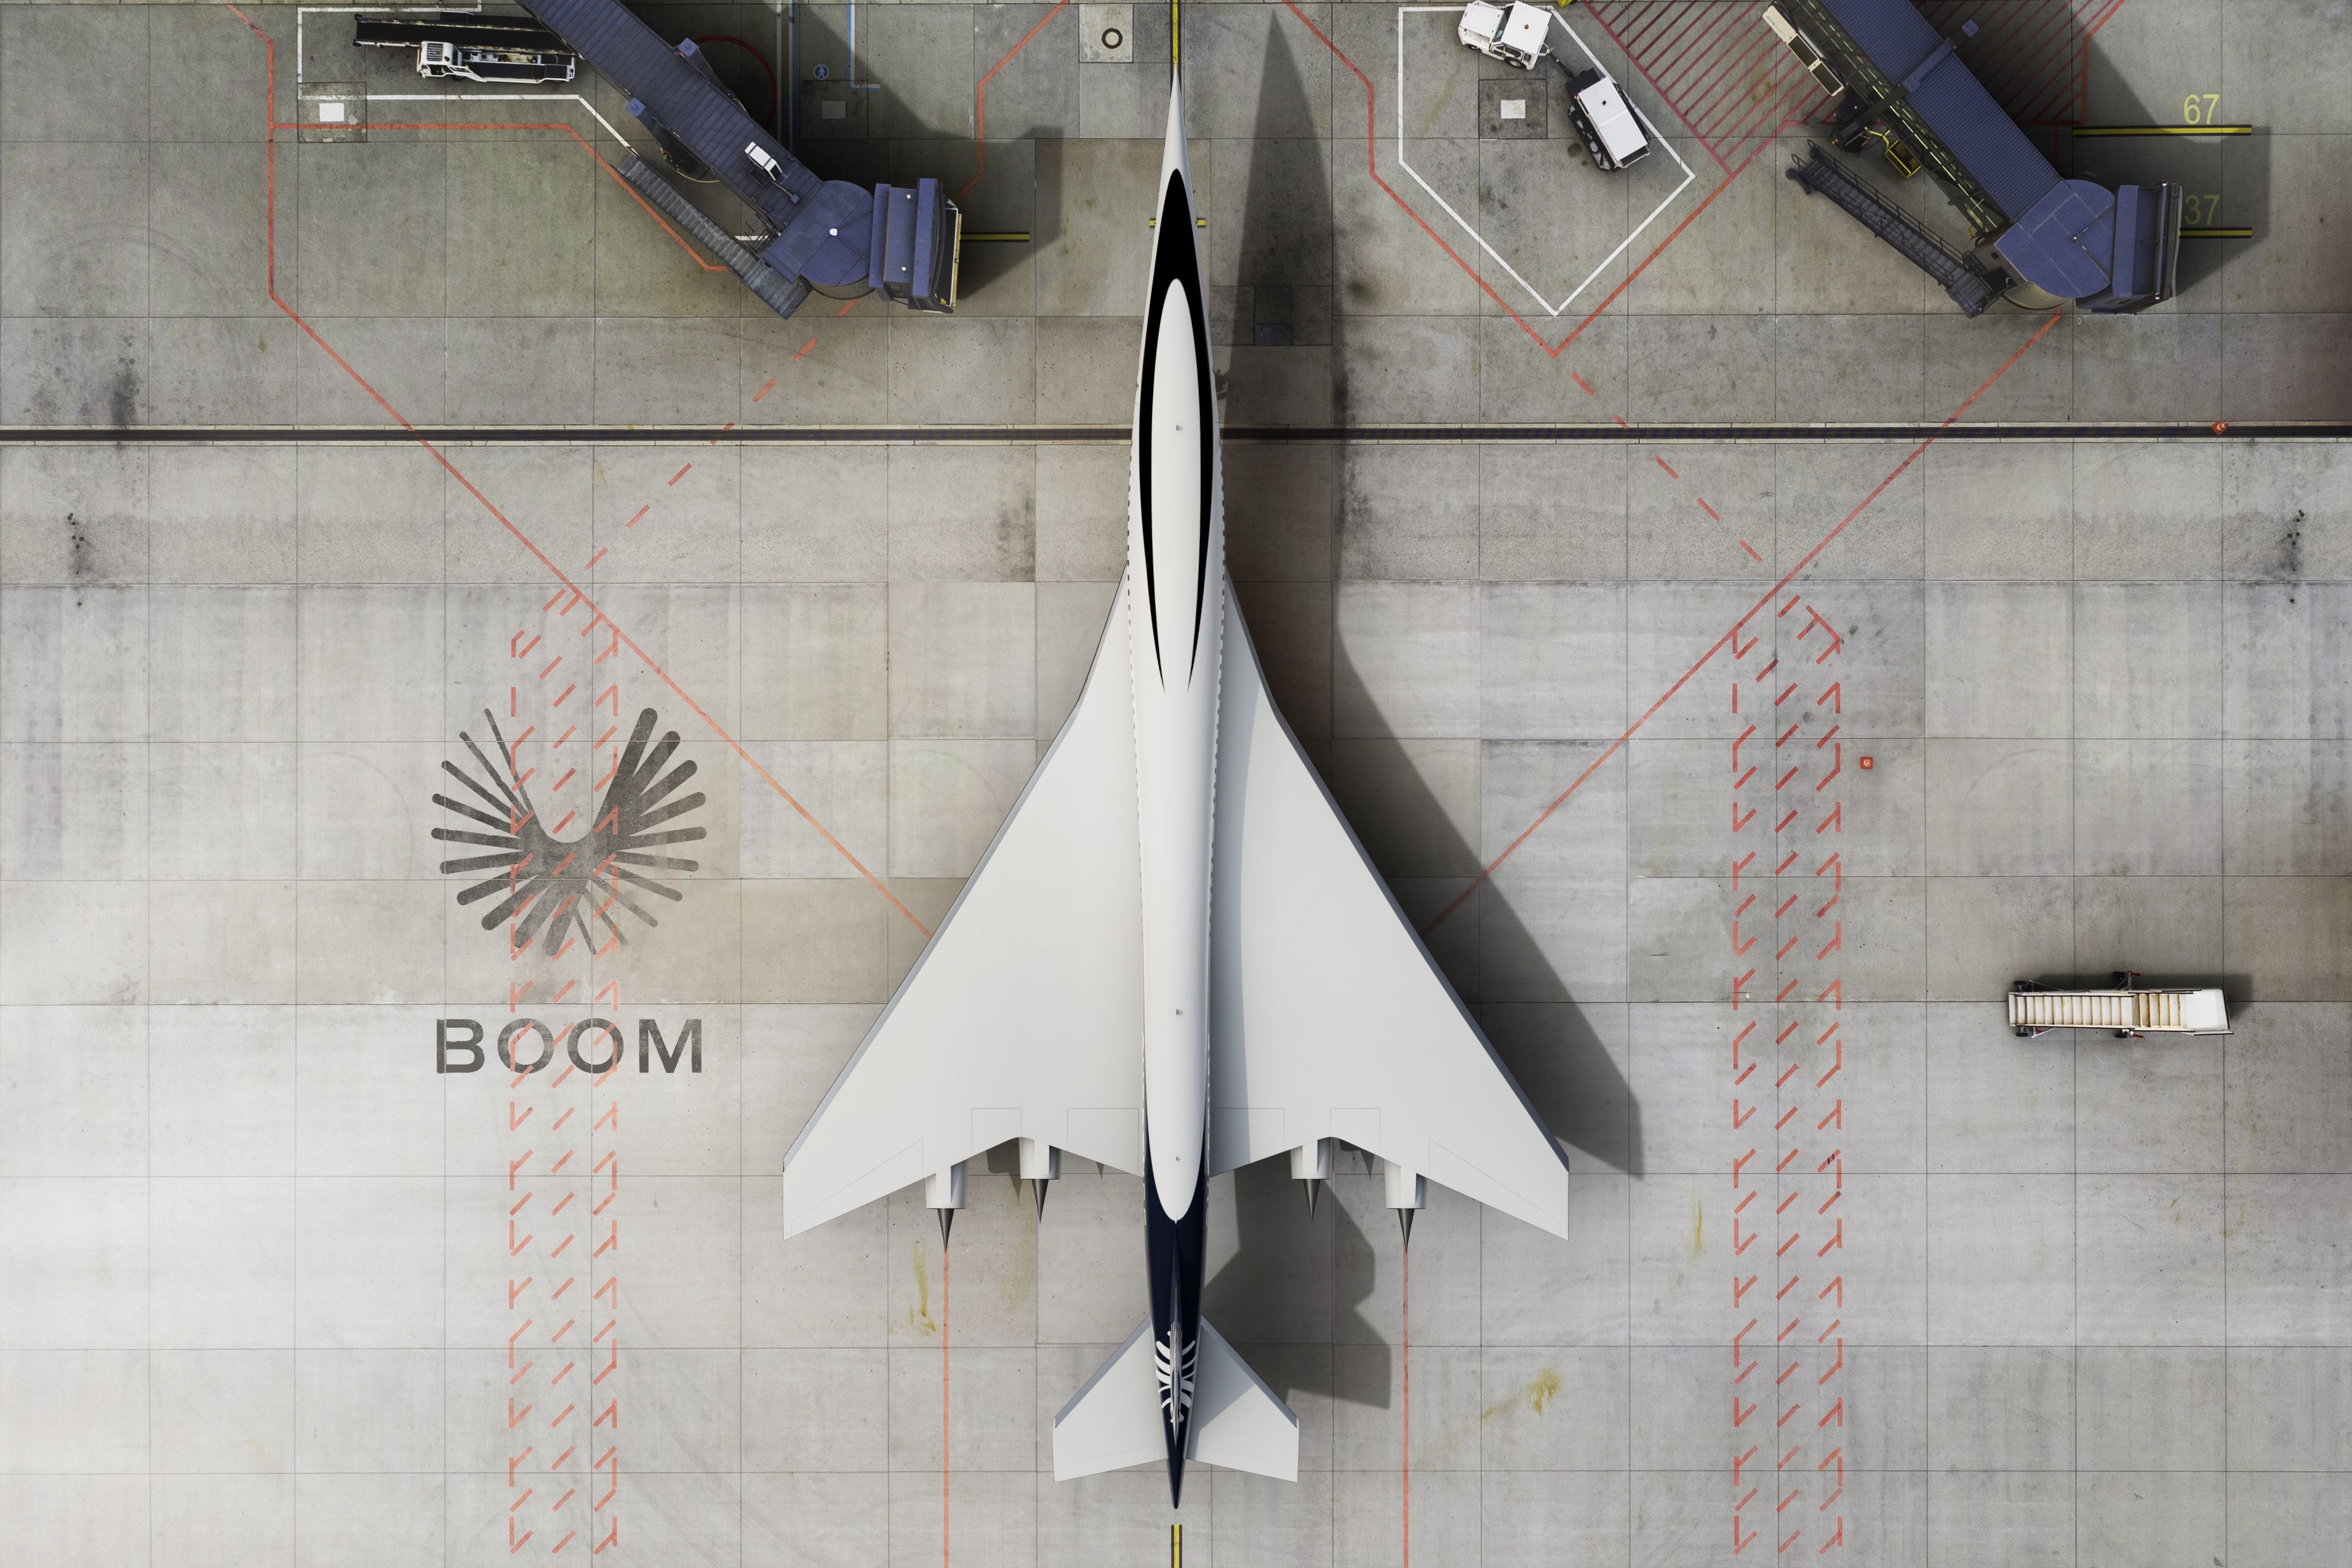 A render of a Boom Supersonic Overture parked at an airport gate.